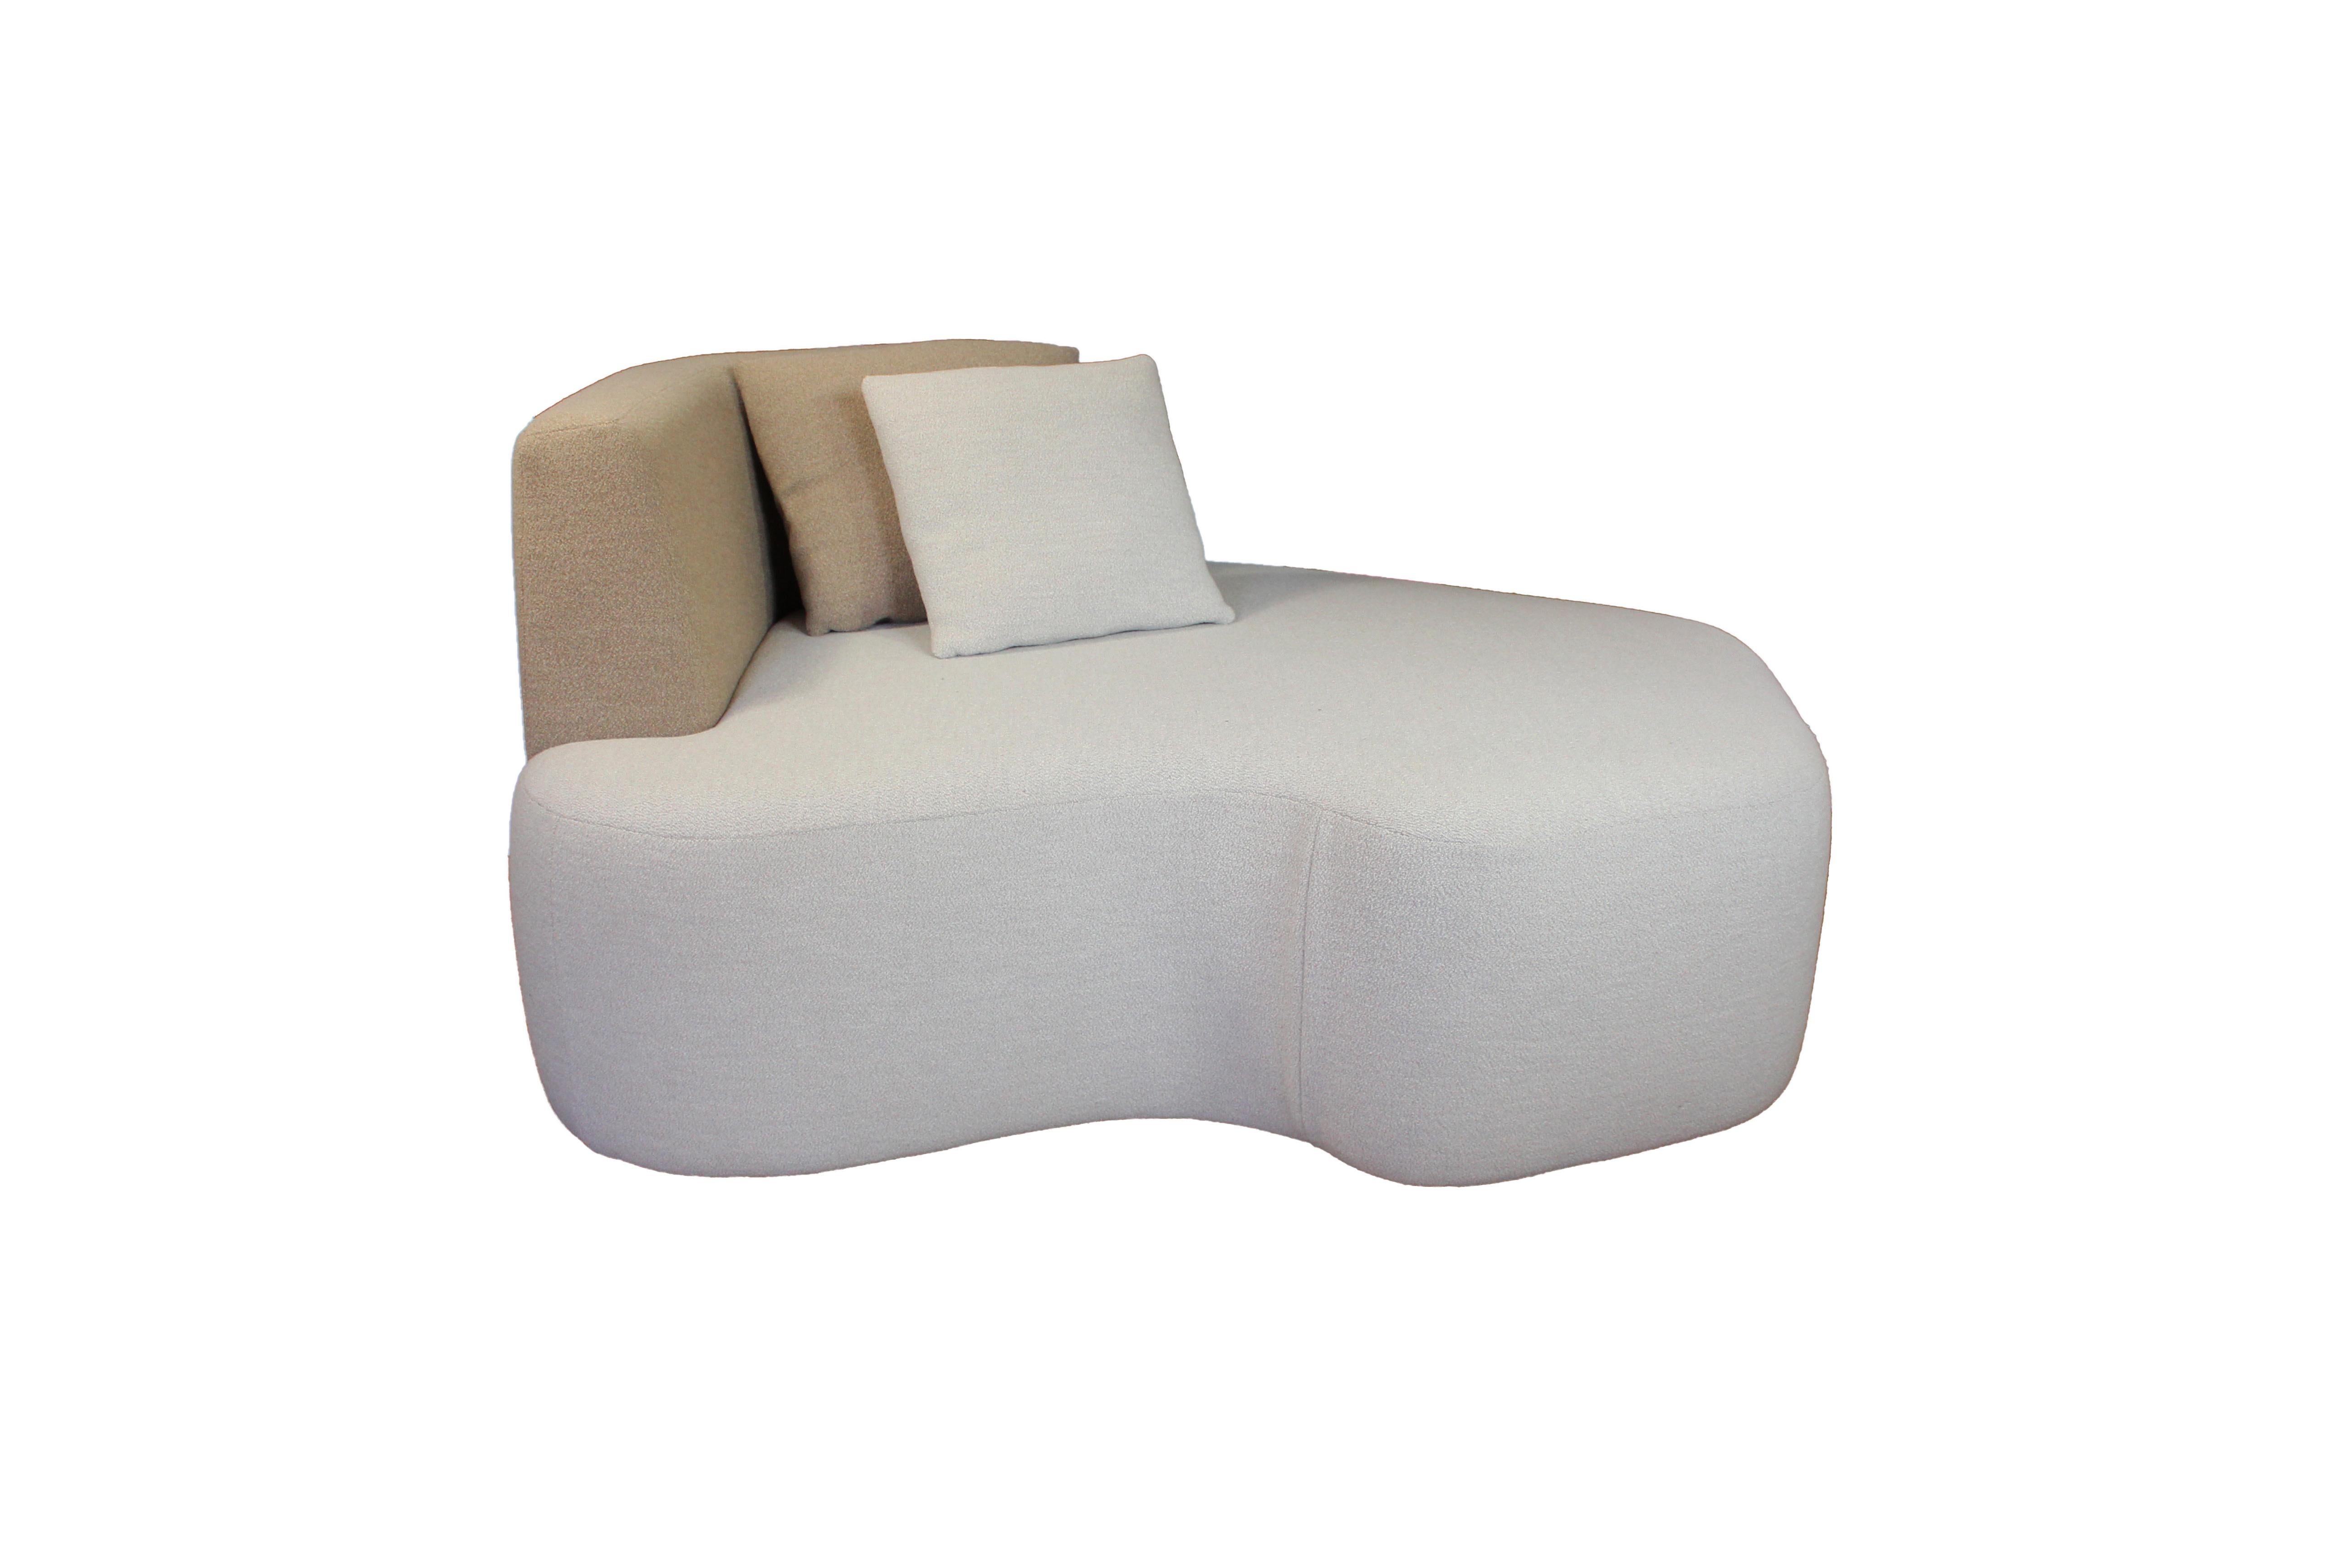 Organic Pierre sofa was inspired by a photographic work Eric Gizard did in the summer of 2019 in Turkey. From white pebbles cleaned and rounded by the sea, he assembled some of them into abstract forms, joining together in organic articulation. Eric